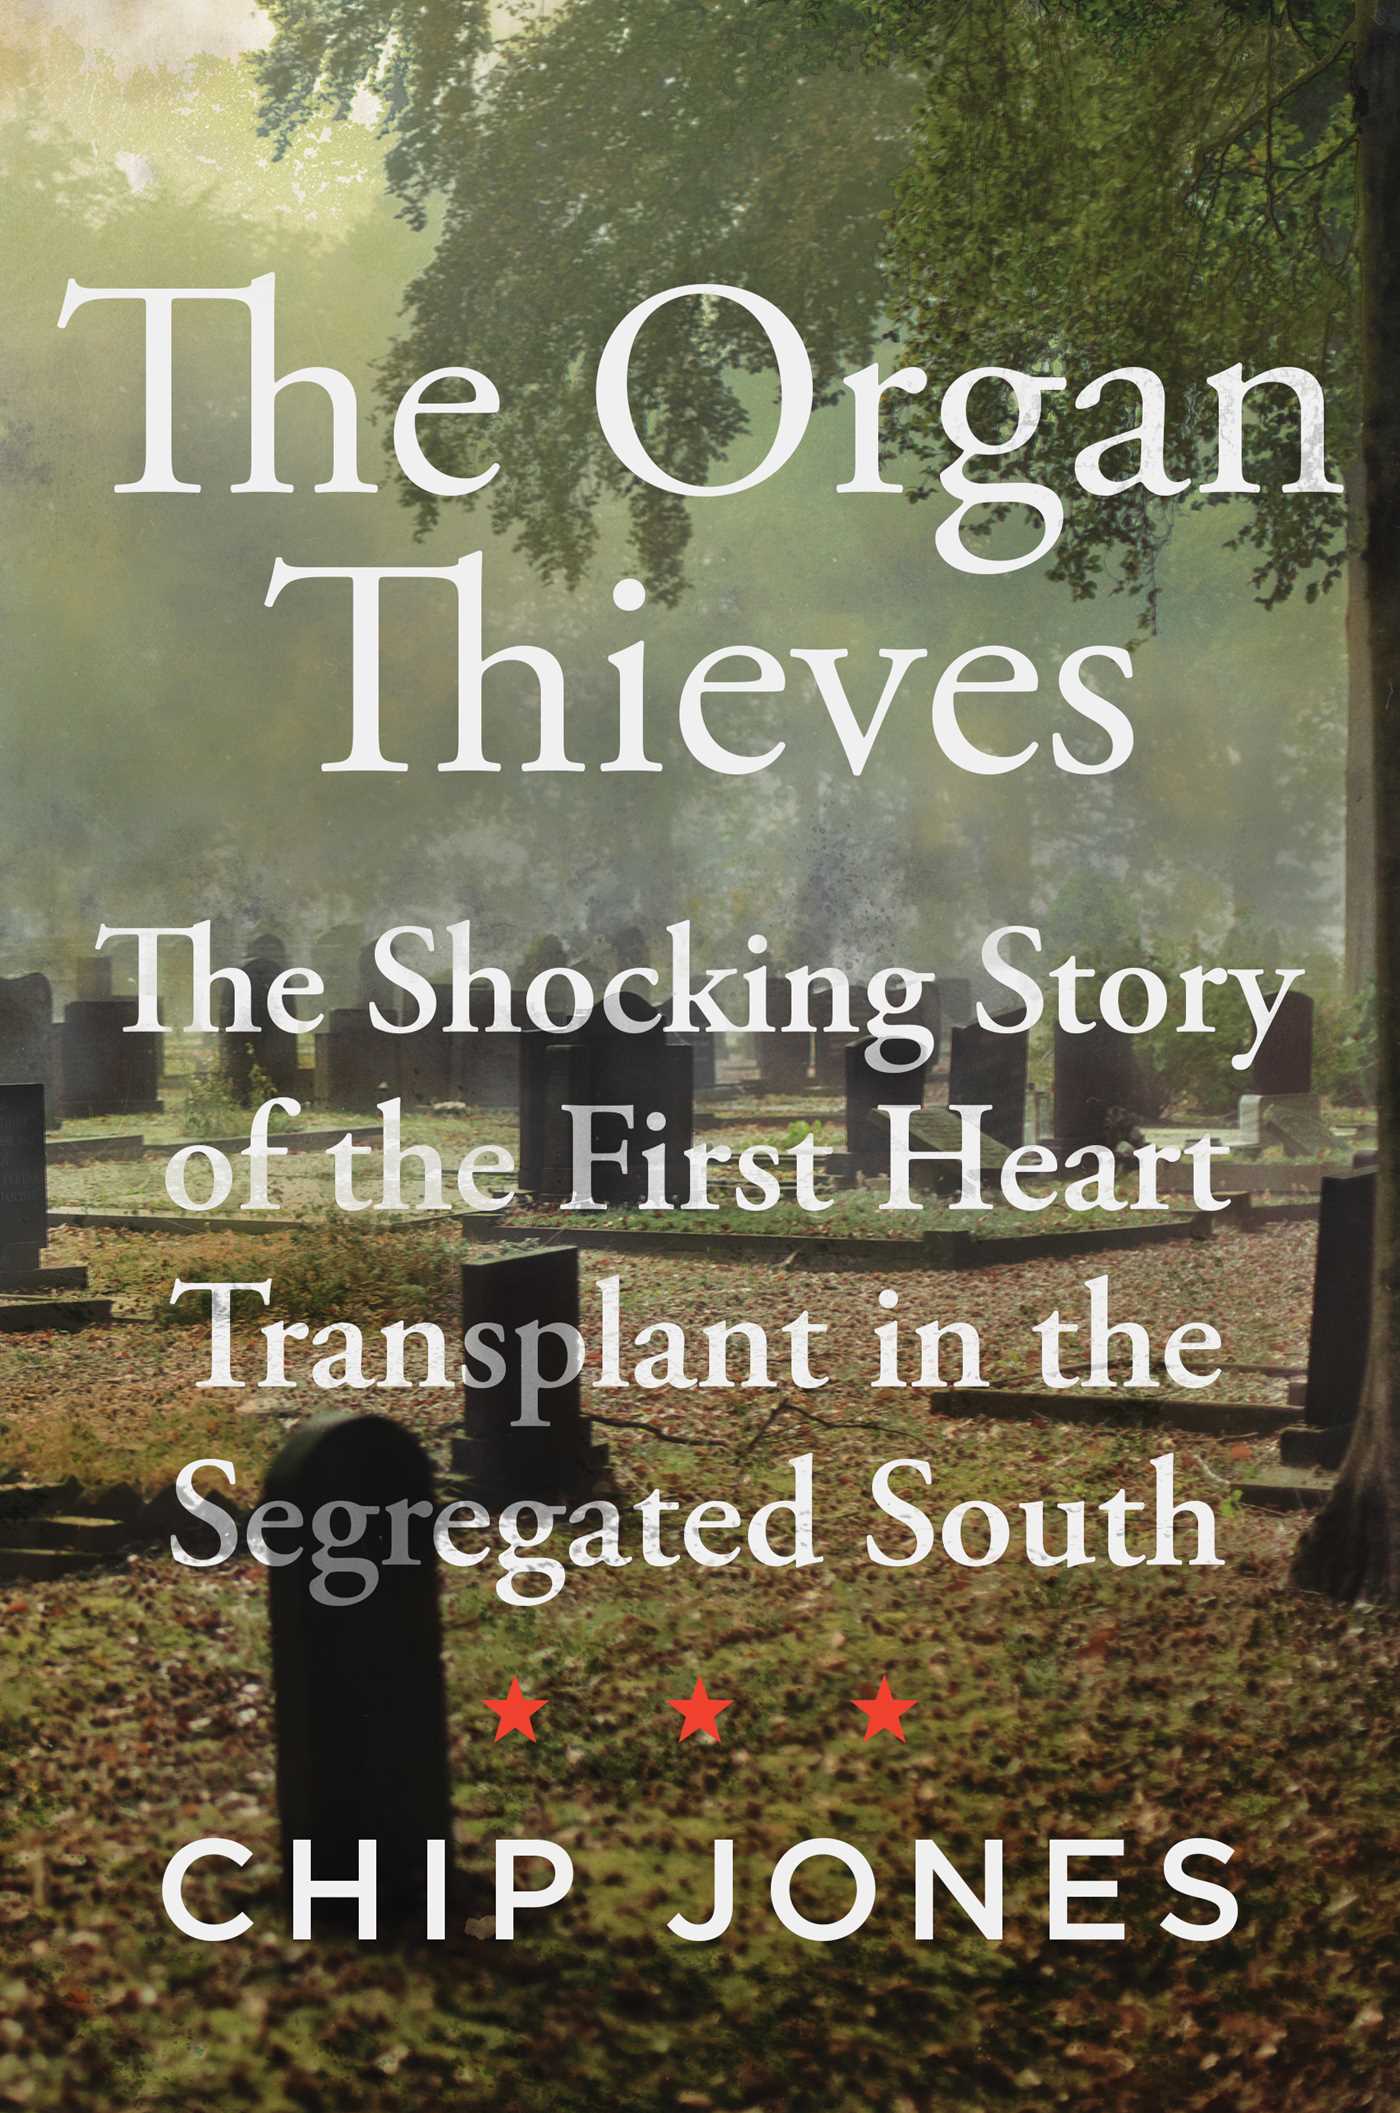 [EPUB] The Organ Thieves: The Shocking Story of the First Heart Transplant in the Segregated South by Chip Jones